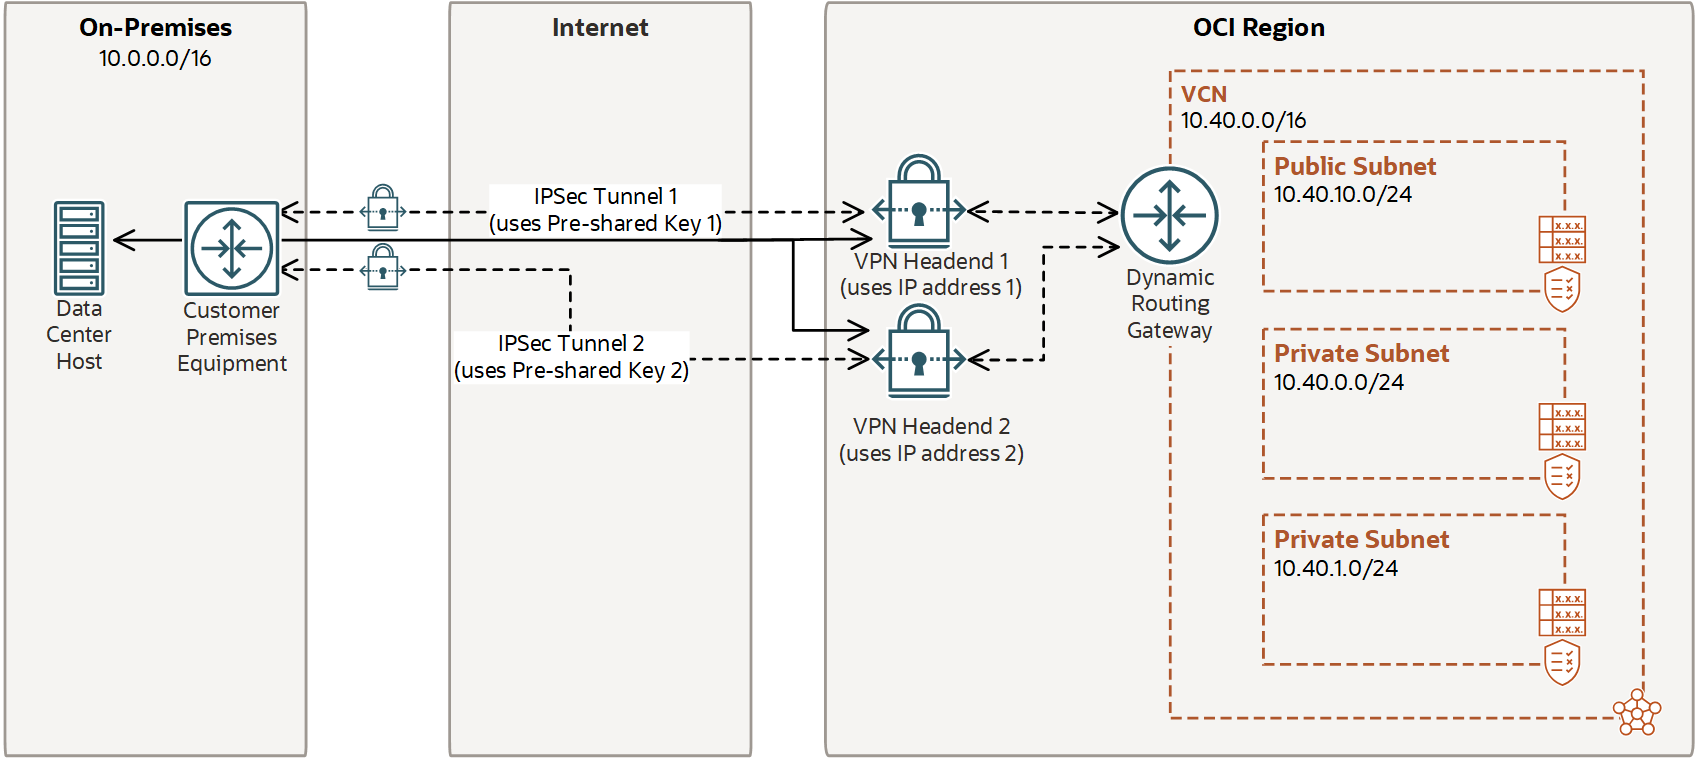 This image summarizes the general layout of the IPSec connection and tunnels.